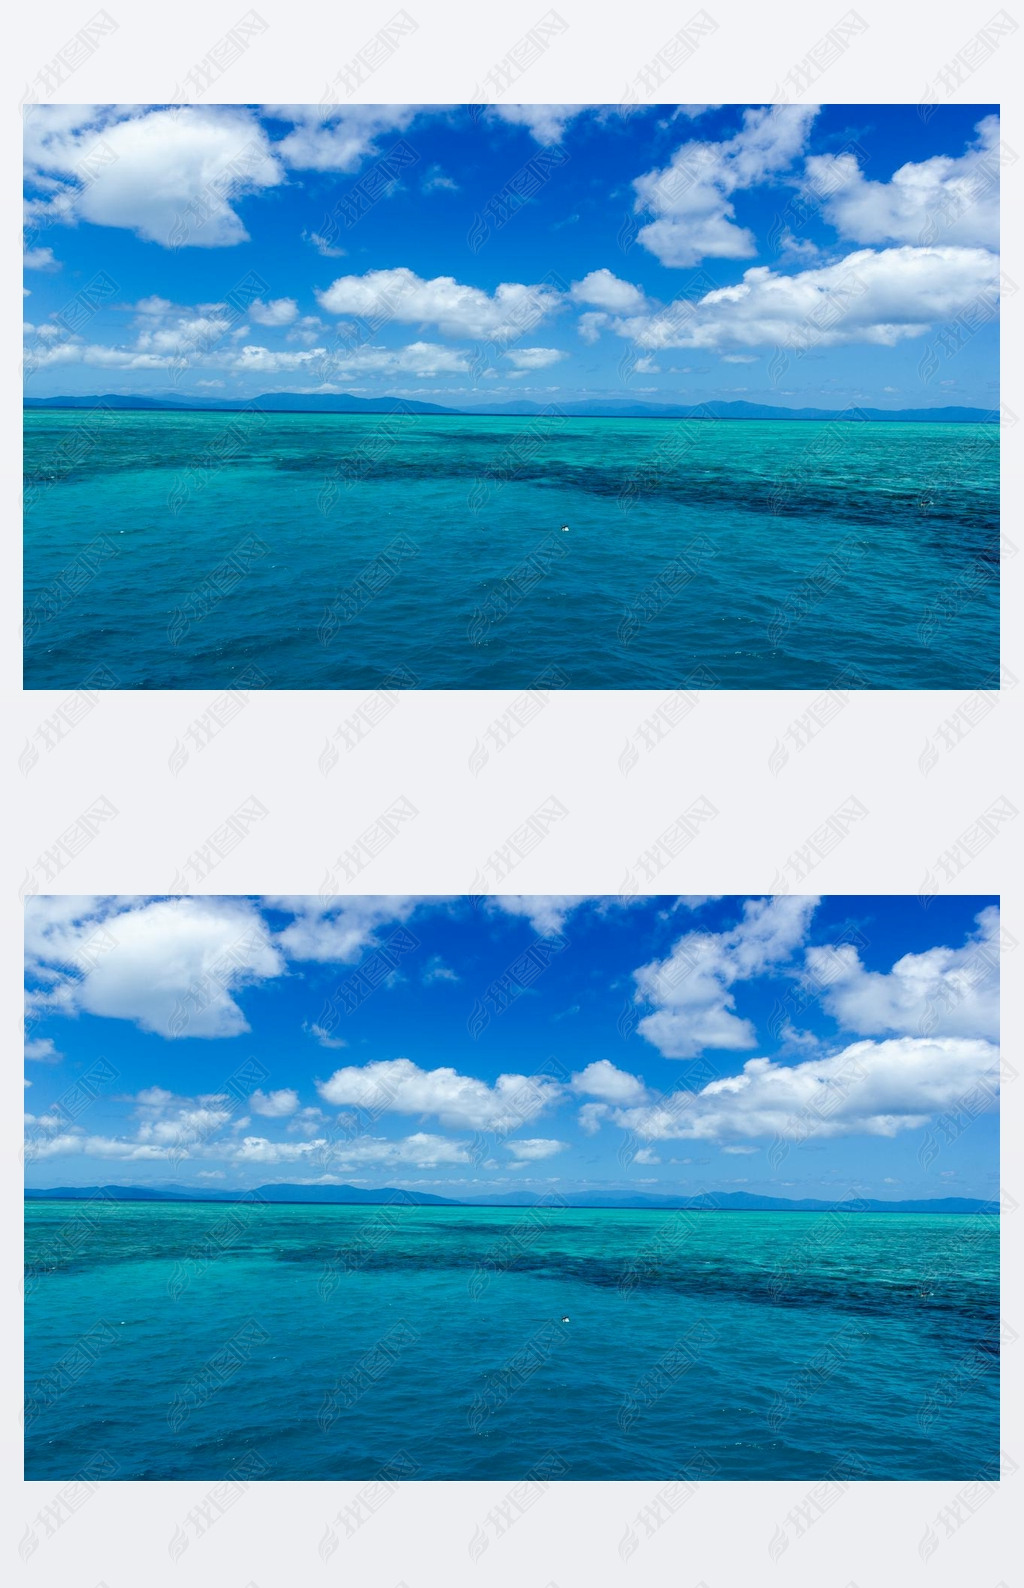 beautiful great barrier reef with white clouds on a sunny day, cairns, australia